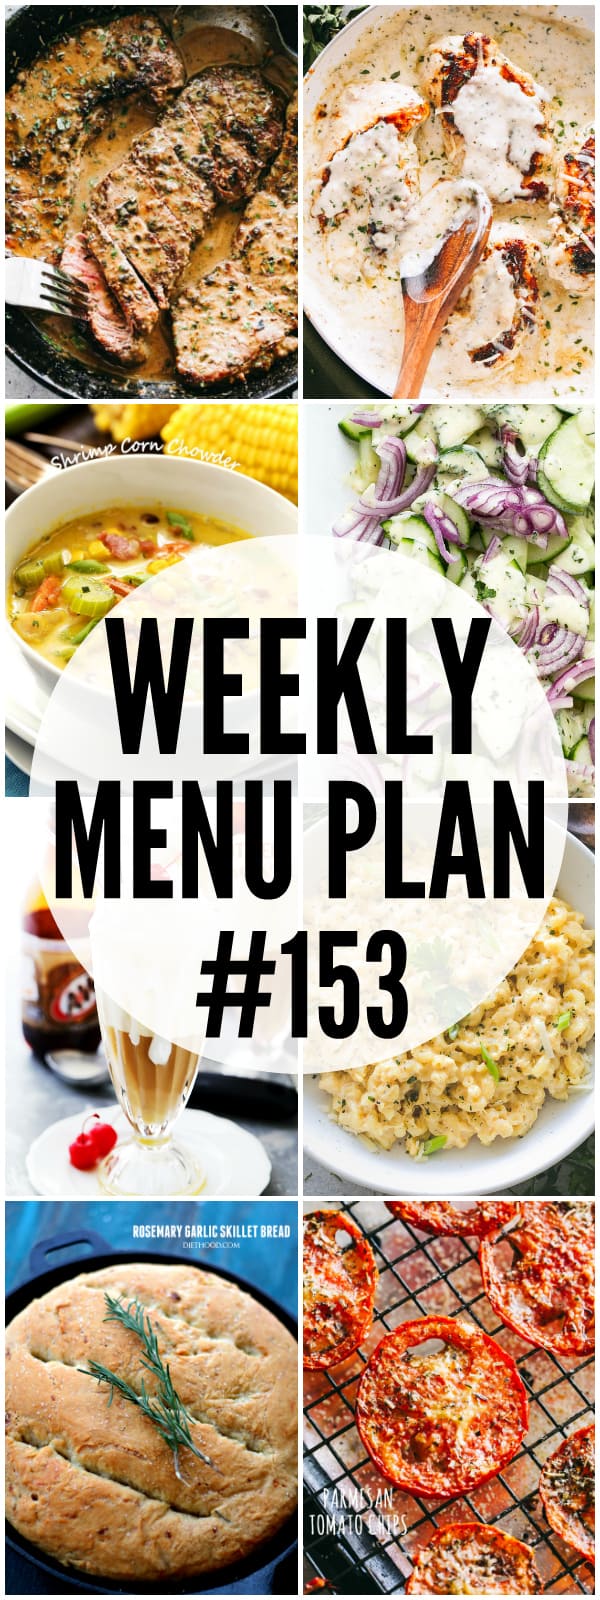 WEEKLY MENU PLAN (#153) - A delicious collection of dinner, side dish and dessert recipes to help you plan your weekly menu and make life easier for you!